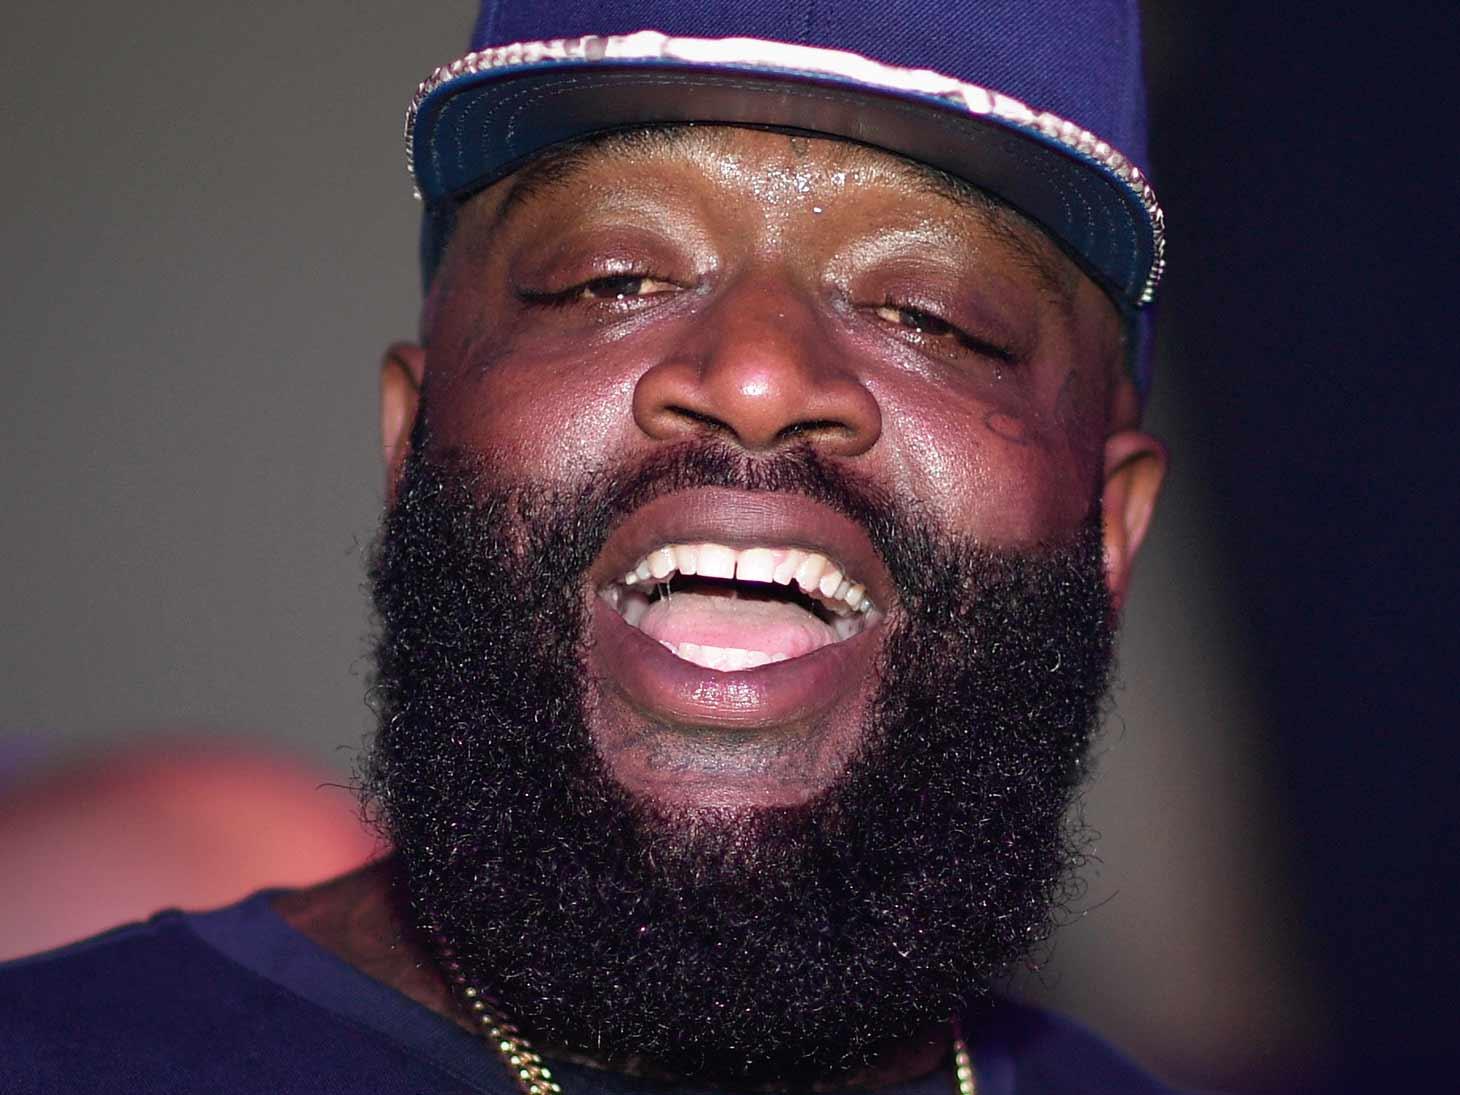 Rick Ross Drops Another $1 Million on Massive Tax Bill, Clears Total of $5.7 Million Owed to IRS